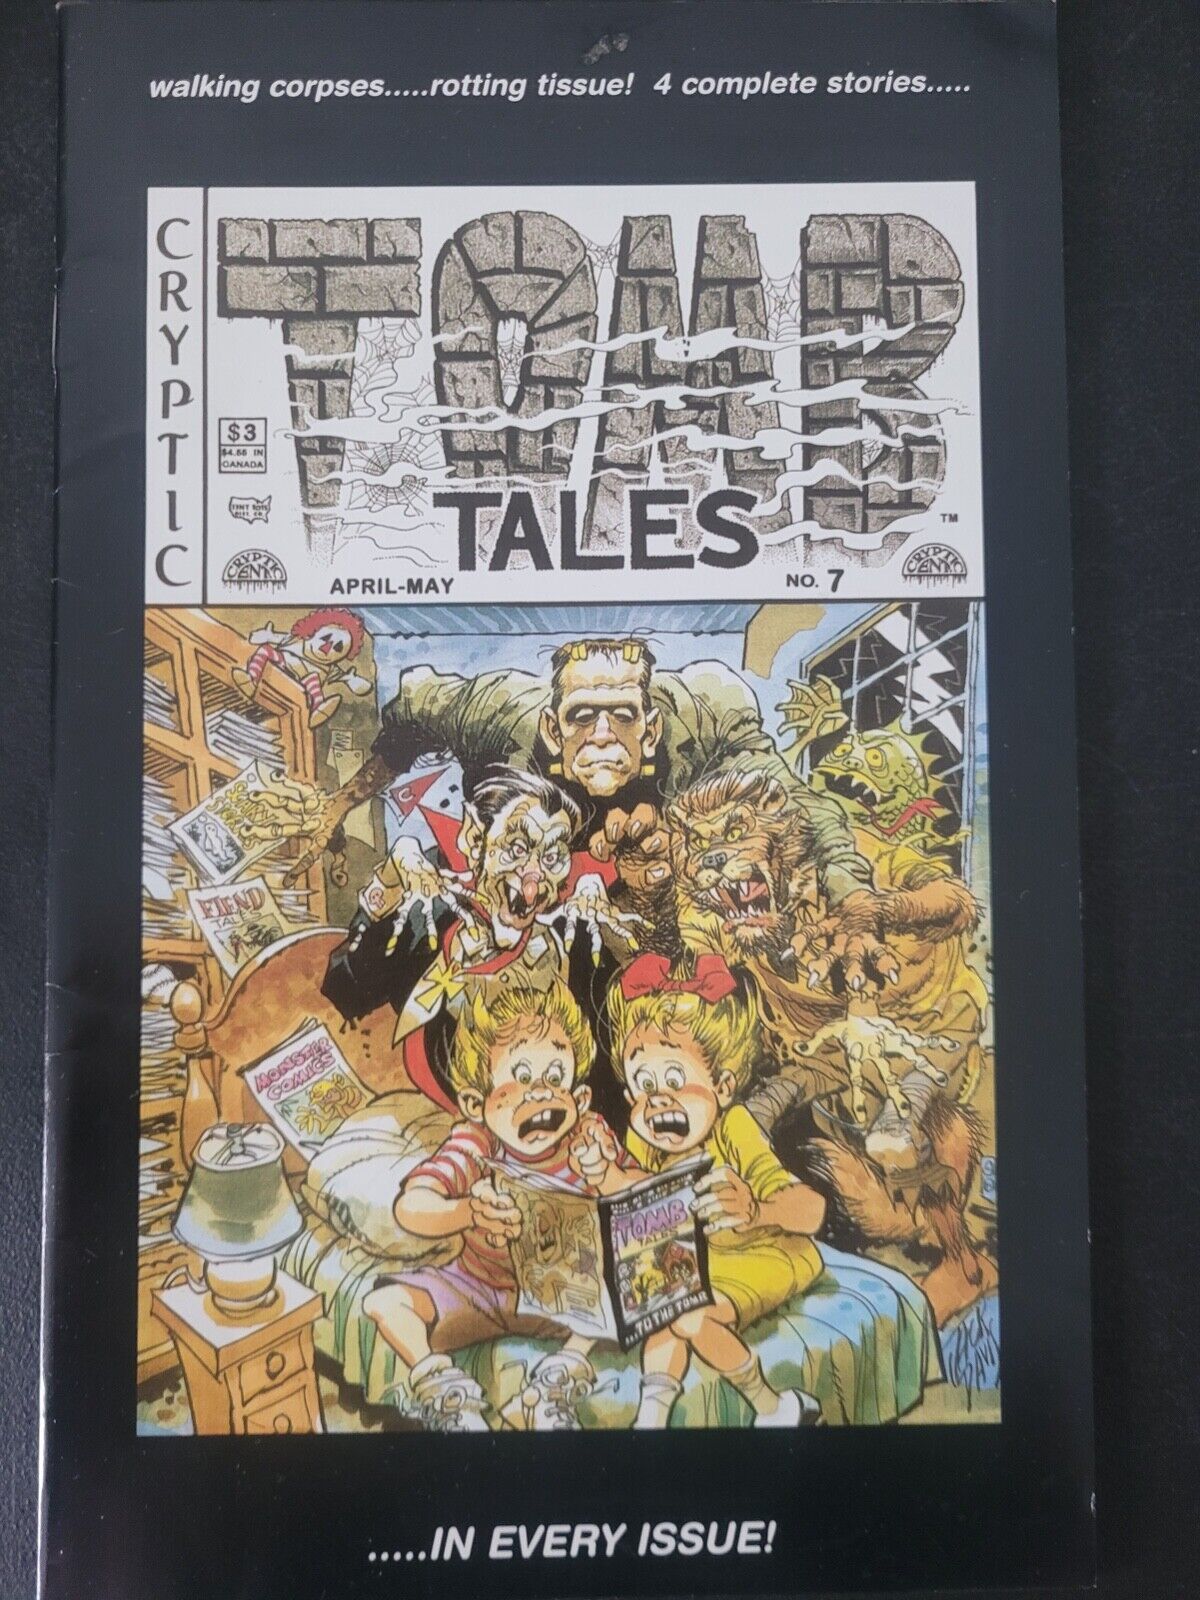 CRYPTIC TOMB TALES #7 (1999) CRYPTIC ENTERTAINMENT COMICS EC HORROR ARTISTS